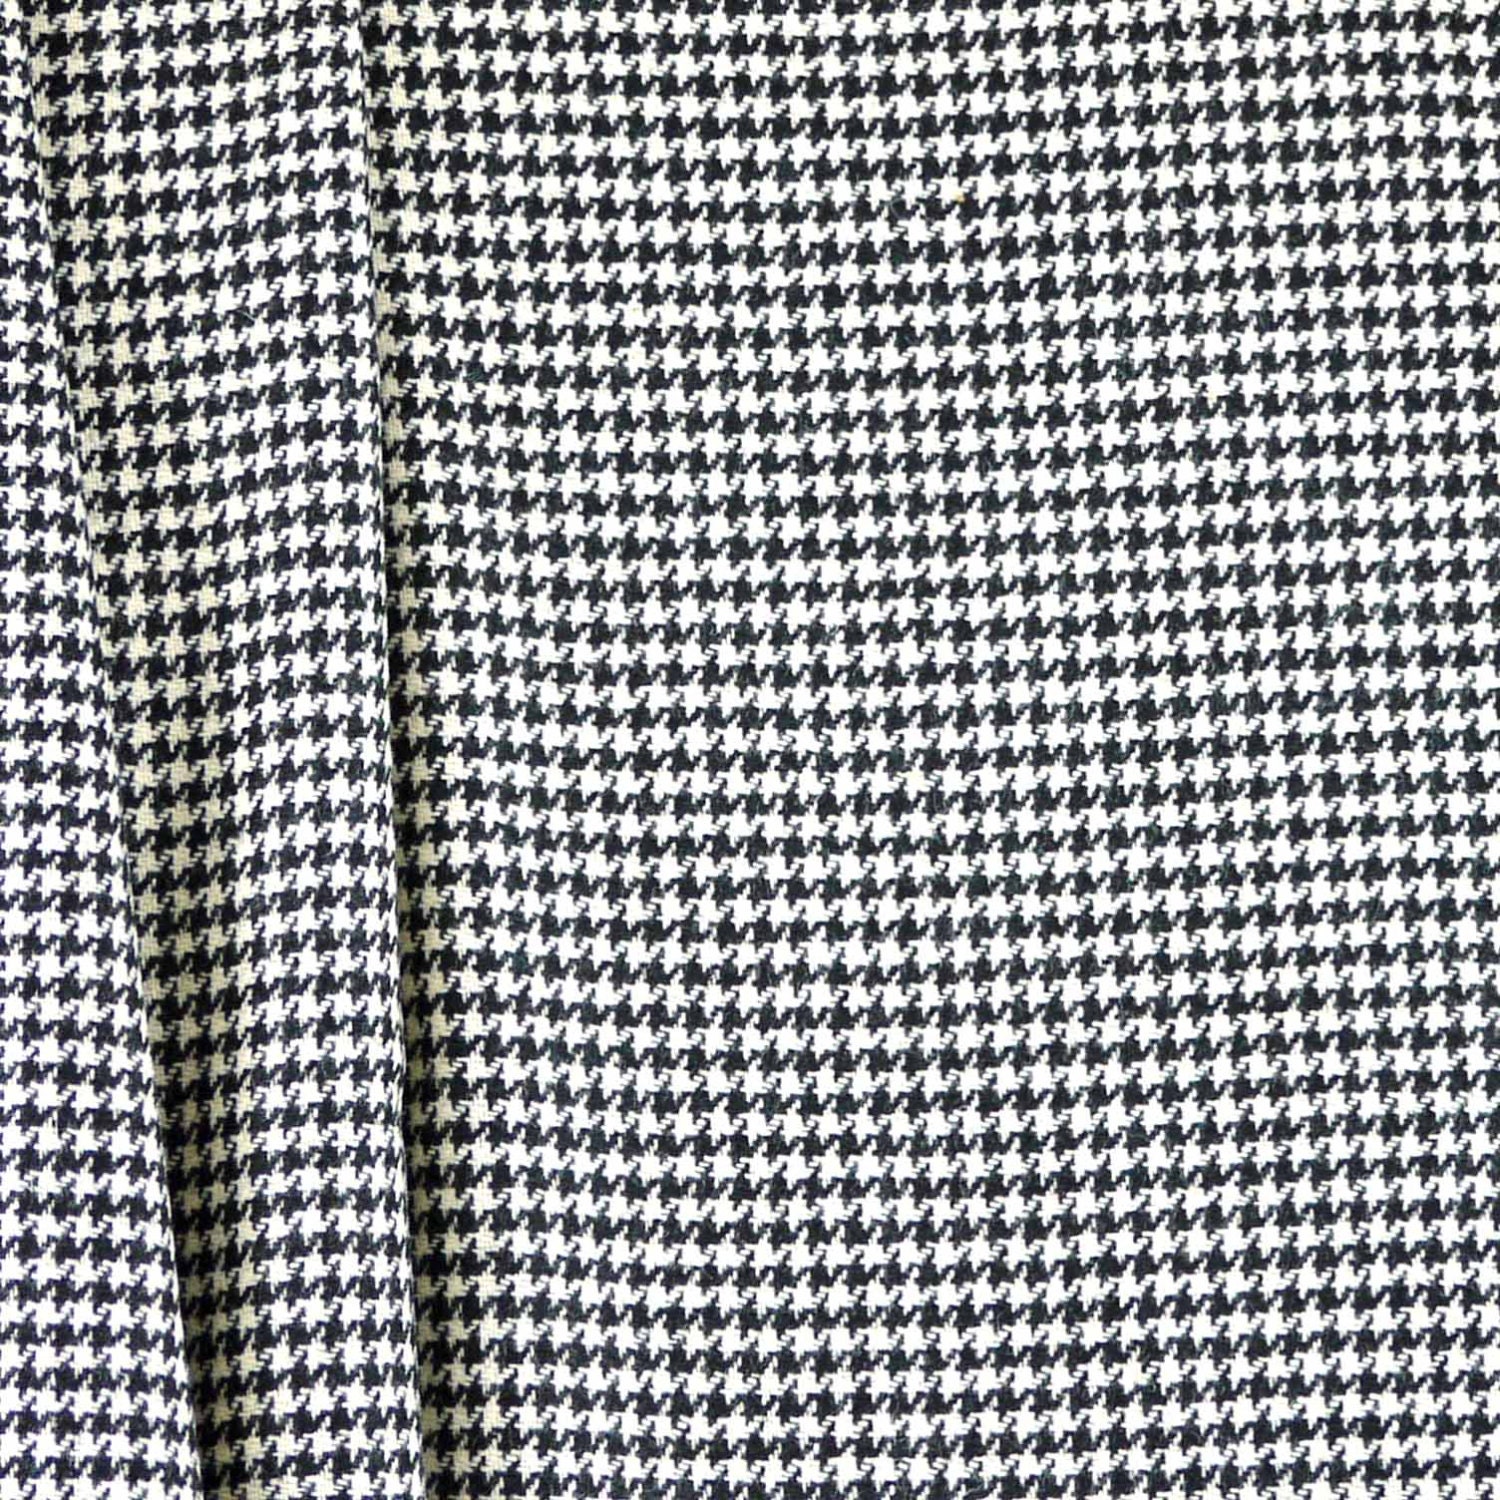 Houndstooth Suiting Fashion Fabric Black and by DartingDogFabric